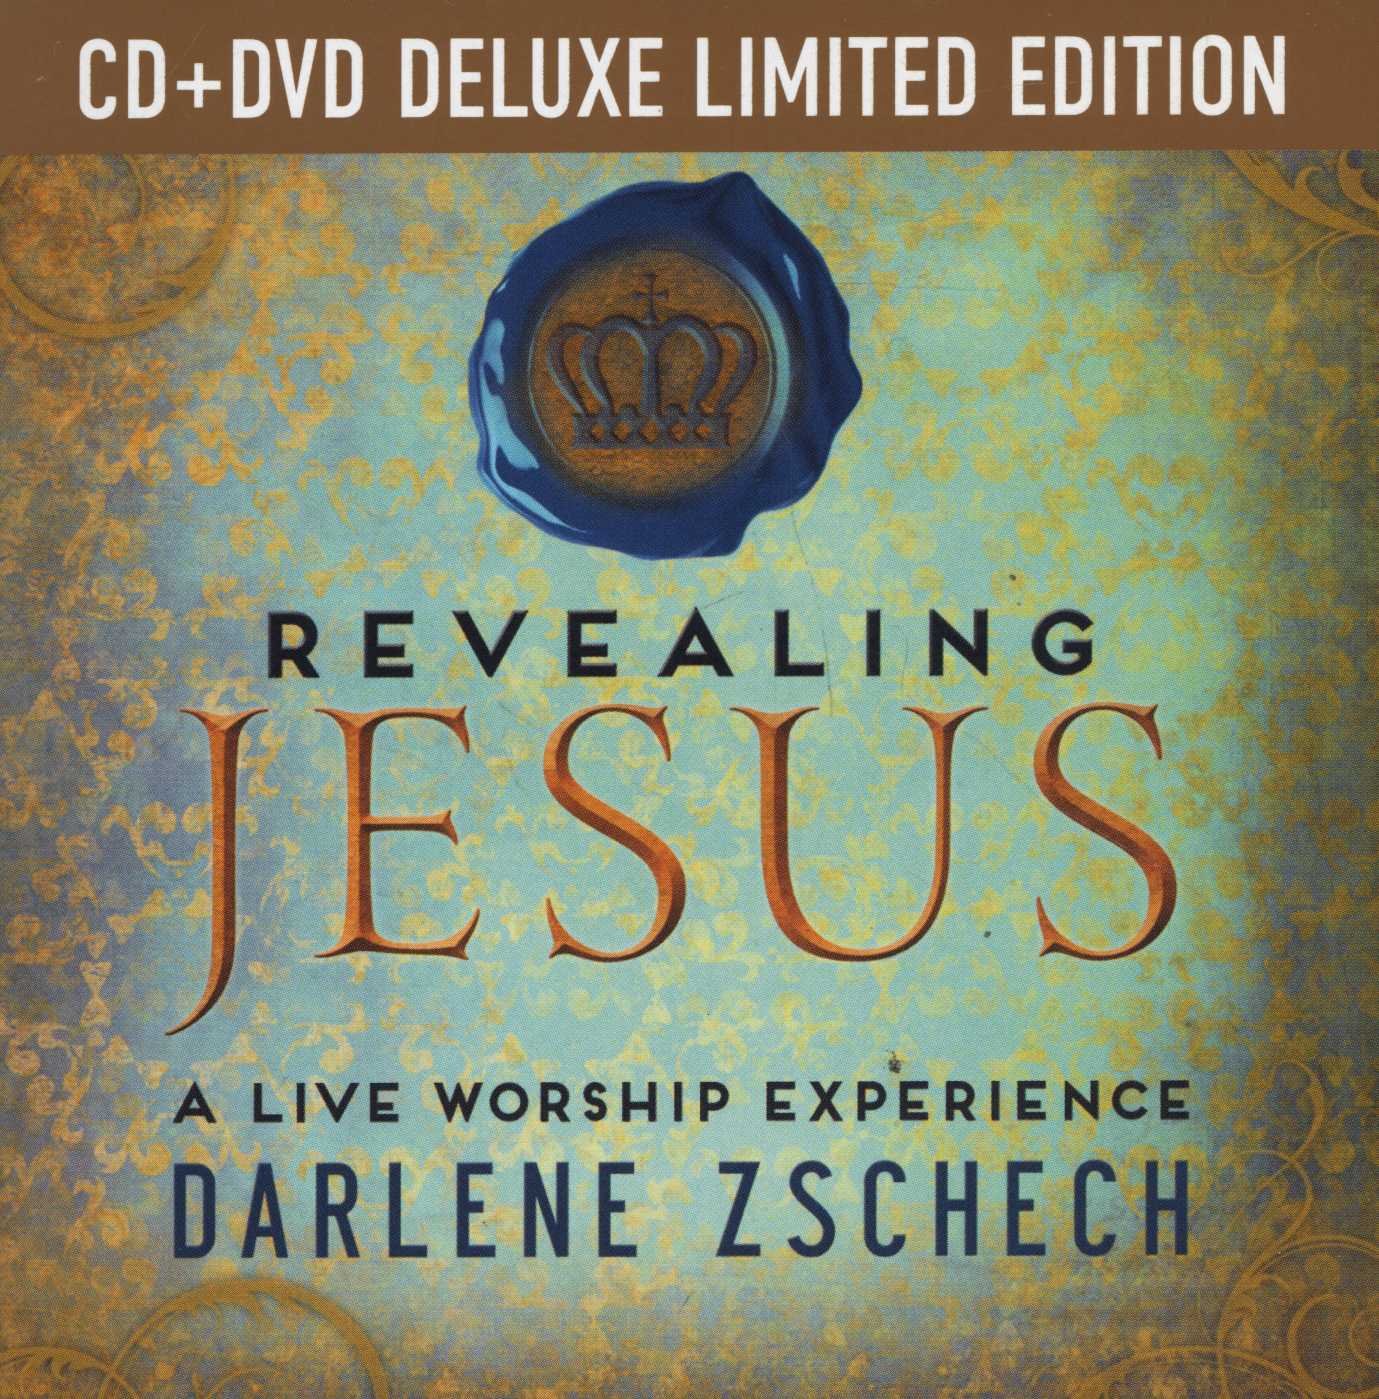 Darlene Zschech - Revealing Jesus [Deluxe Limited Edition] (CD+DVD)